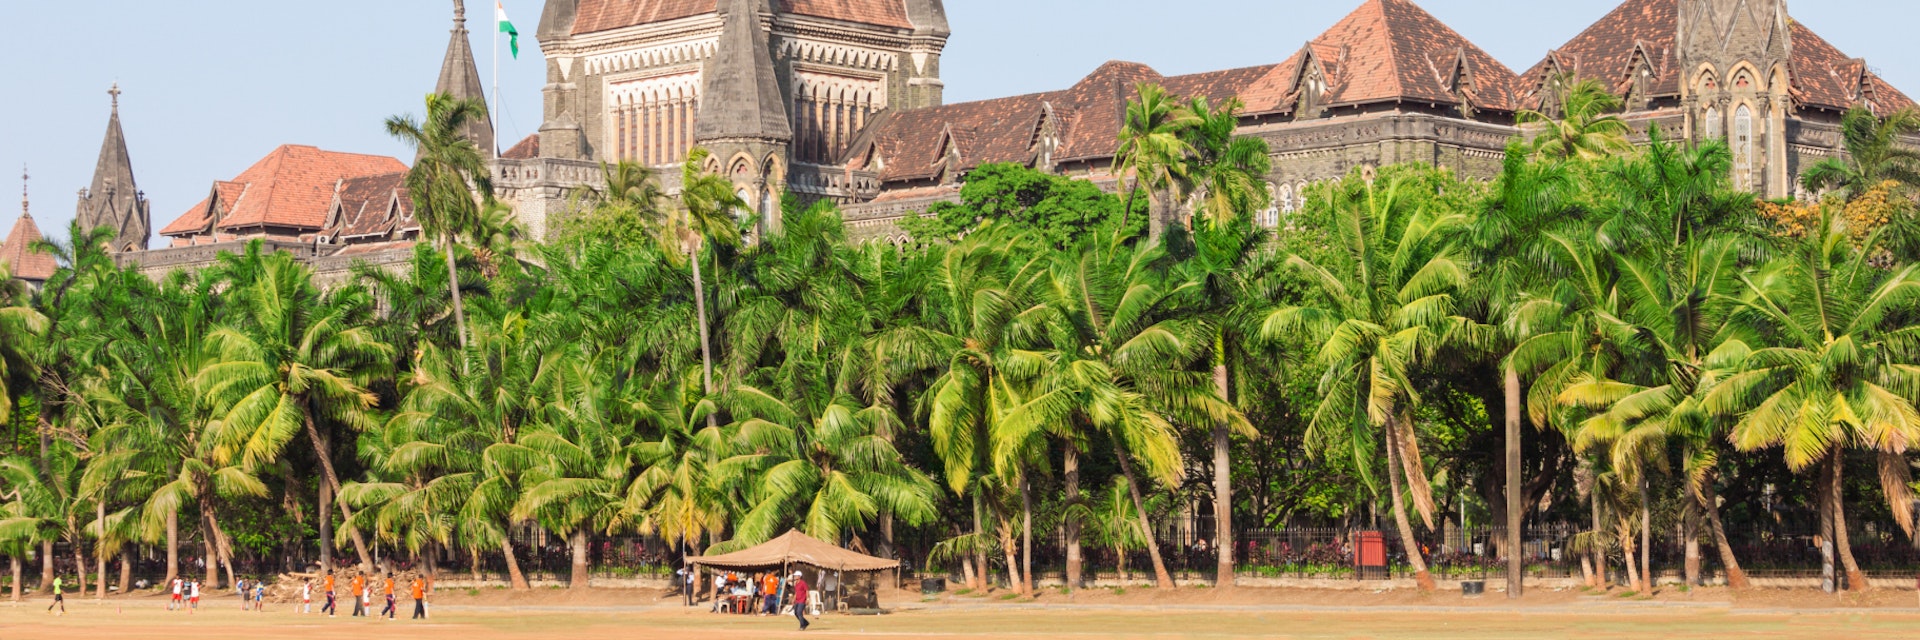 Bombay High Court at Mumbai is one of the oldest High Courts of India; Shutterstock ID 214476823; Your name (First / Last): Lauren Gillmore; GL account no.: 56530; Netsuite department name: Online-Design; Full Product or Project name including edition: 65050/ Online Design /LaurenGillmore/POI